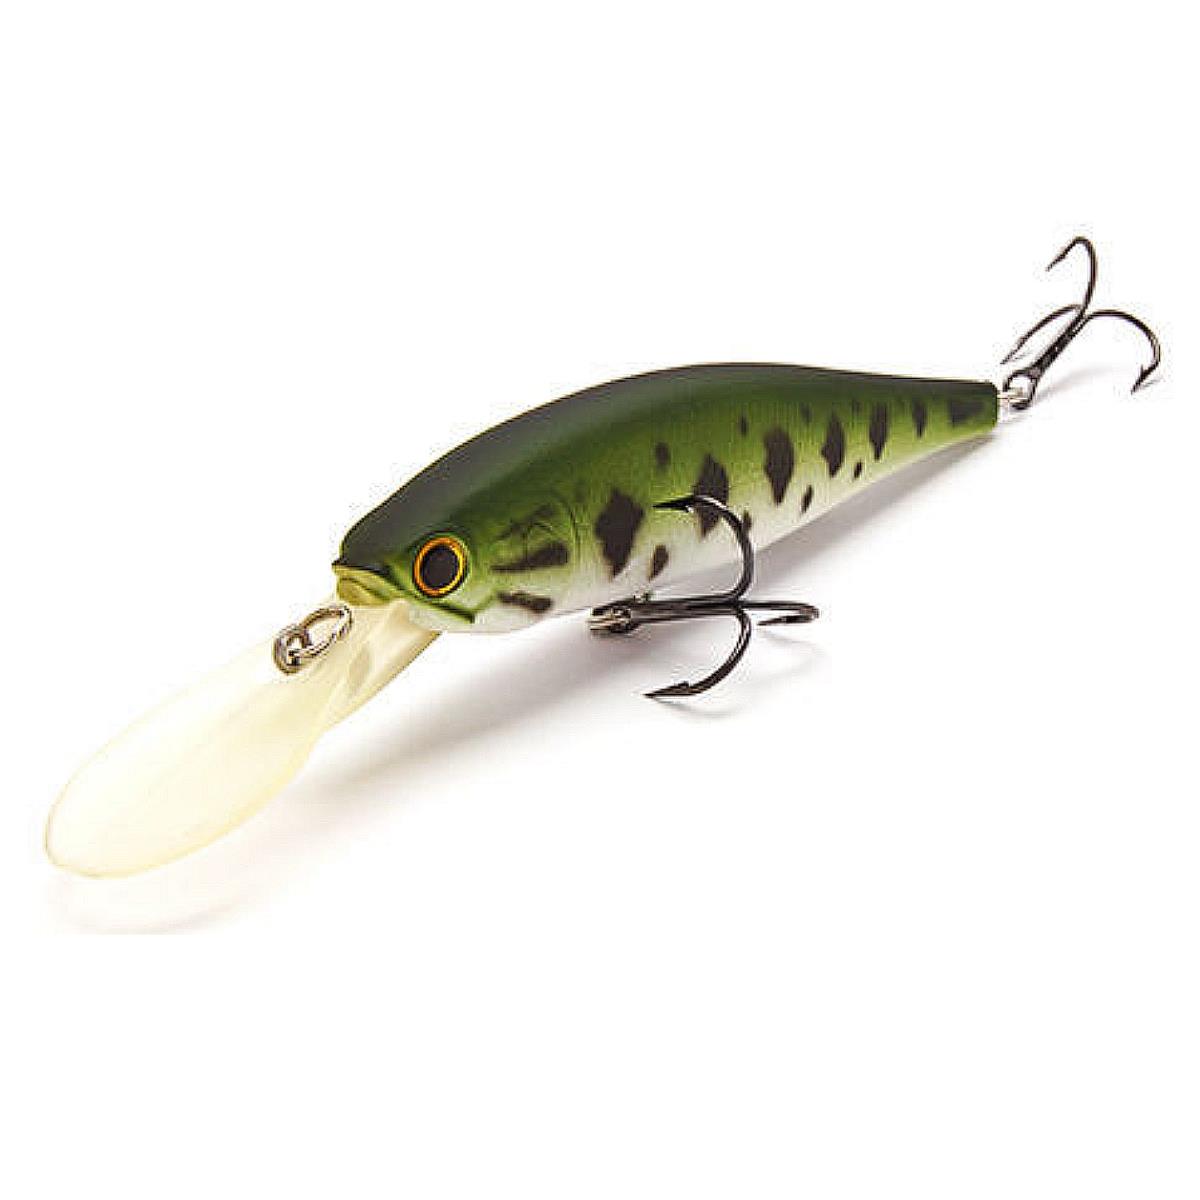 Воблер Pointer 100DD-805 Large Mouth Bass Lucky Craft воблер pointer 100dd 180 flake flake golden sun fish lucky craft